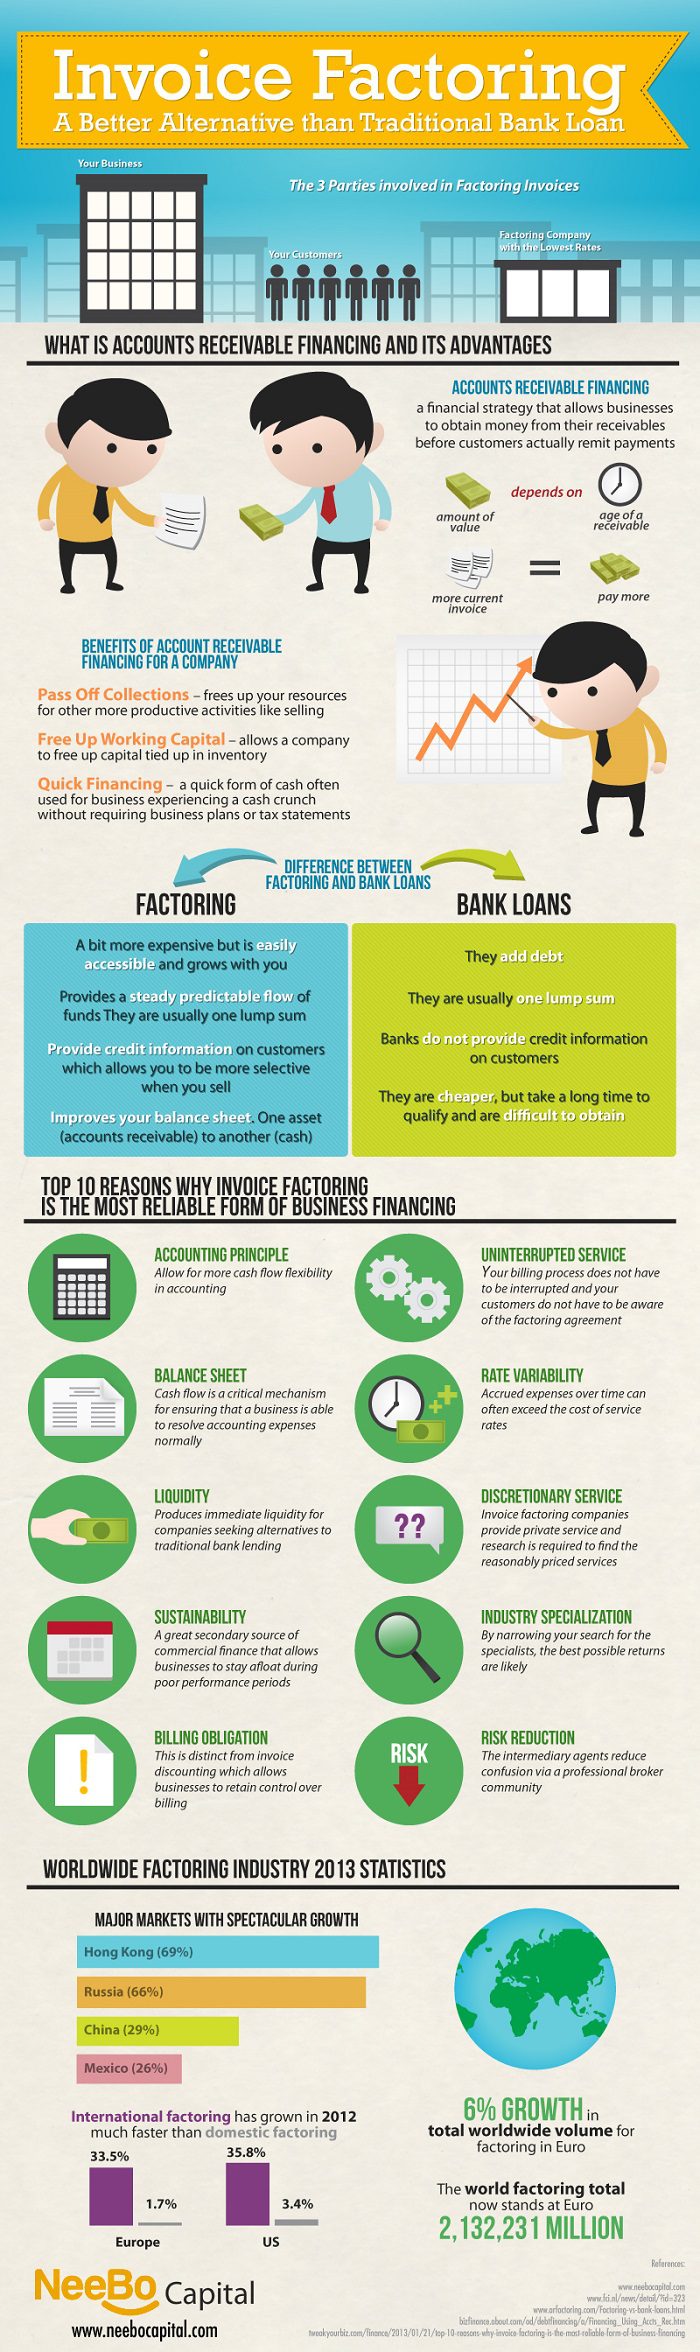 Comparison Between Banks and Invoice Factoring